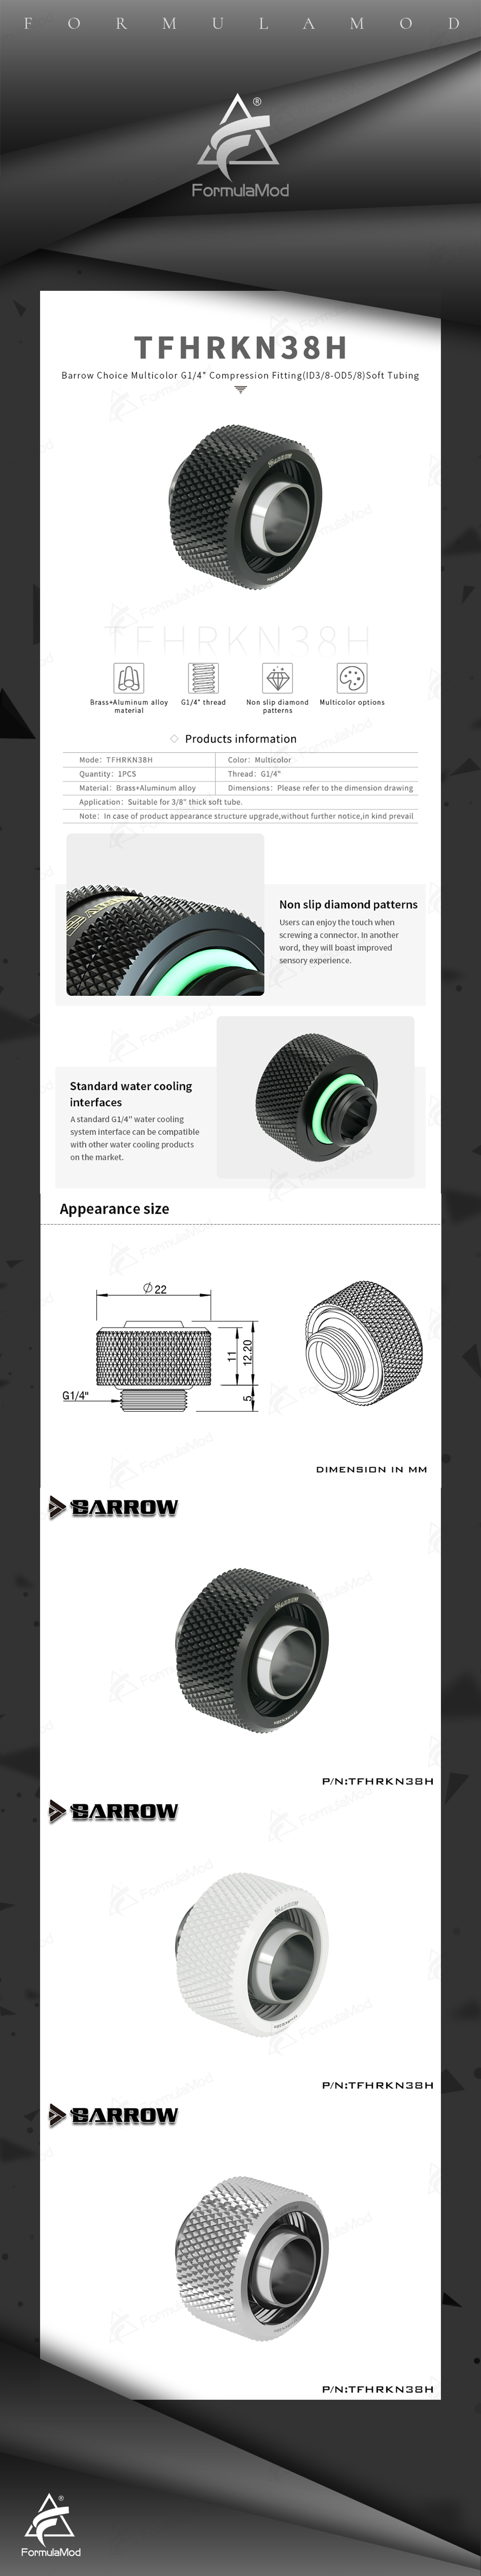 Barrow Soft Tube Fitting For 10x16 mm (3/8"ID*5/8"OD), G1/4" Compression Connector, Water Cooling Soft Tubing Compression Adapter, TFHRKN38H  